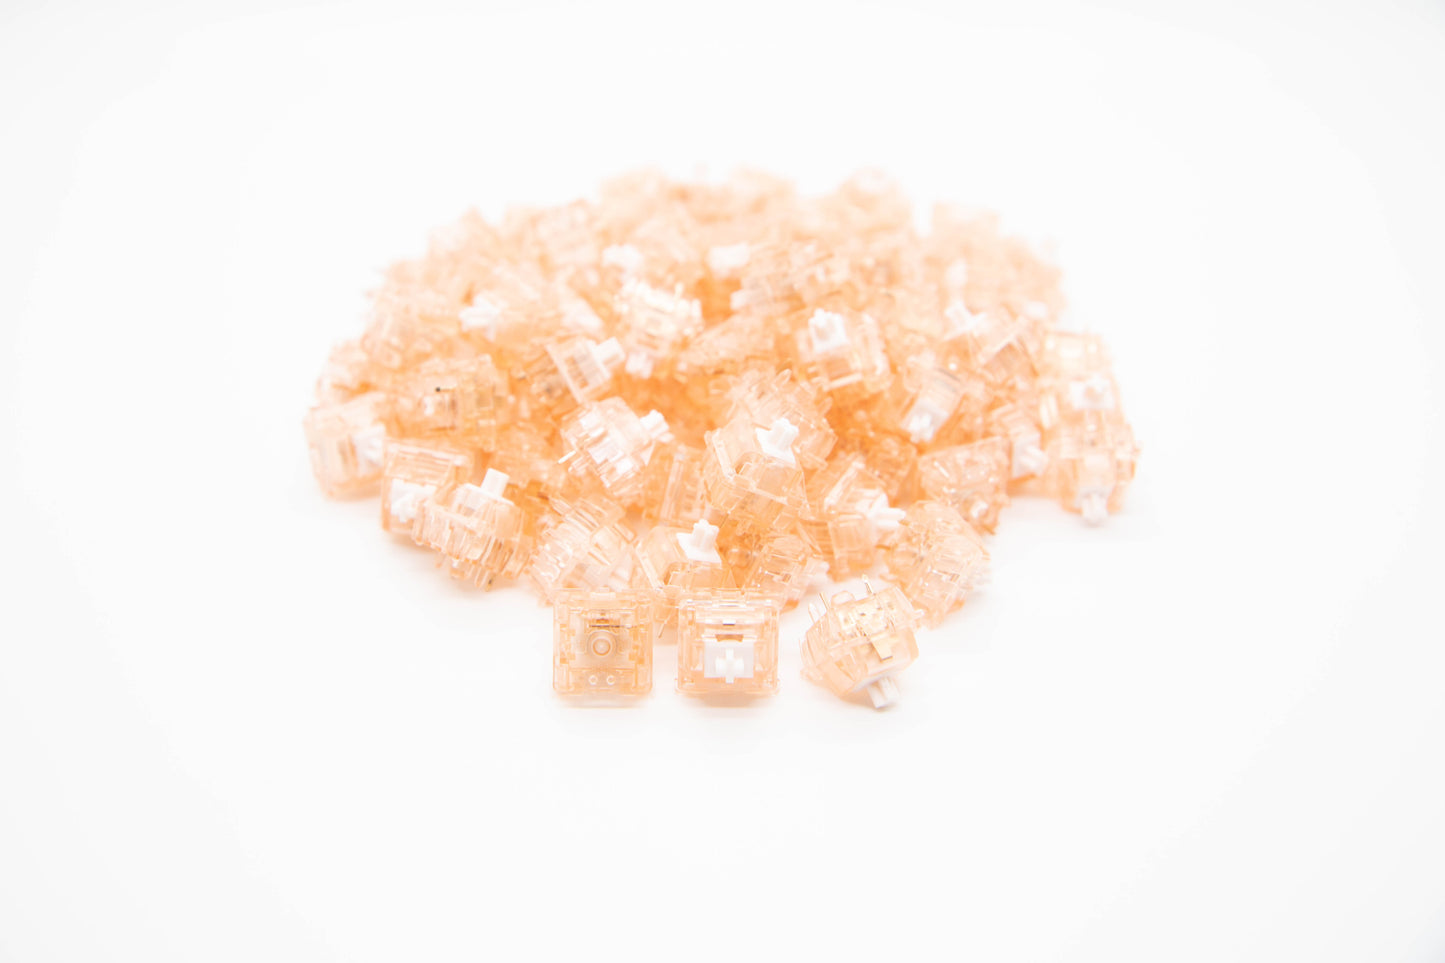 Close-up shot of a pile of Quartz V2 mechanical keyboard switches featuring tan transparent housing and white stems